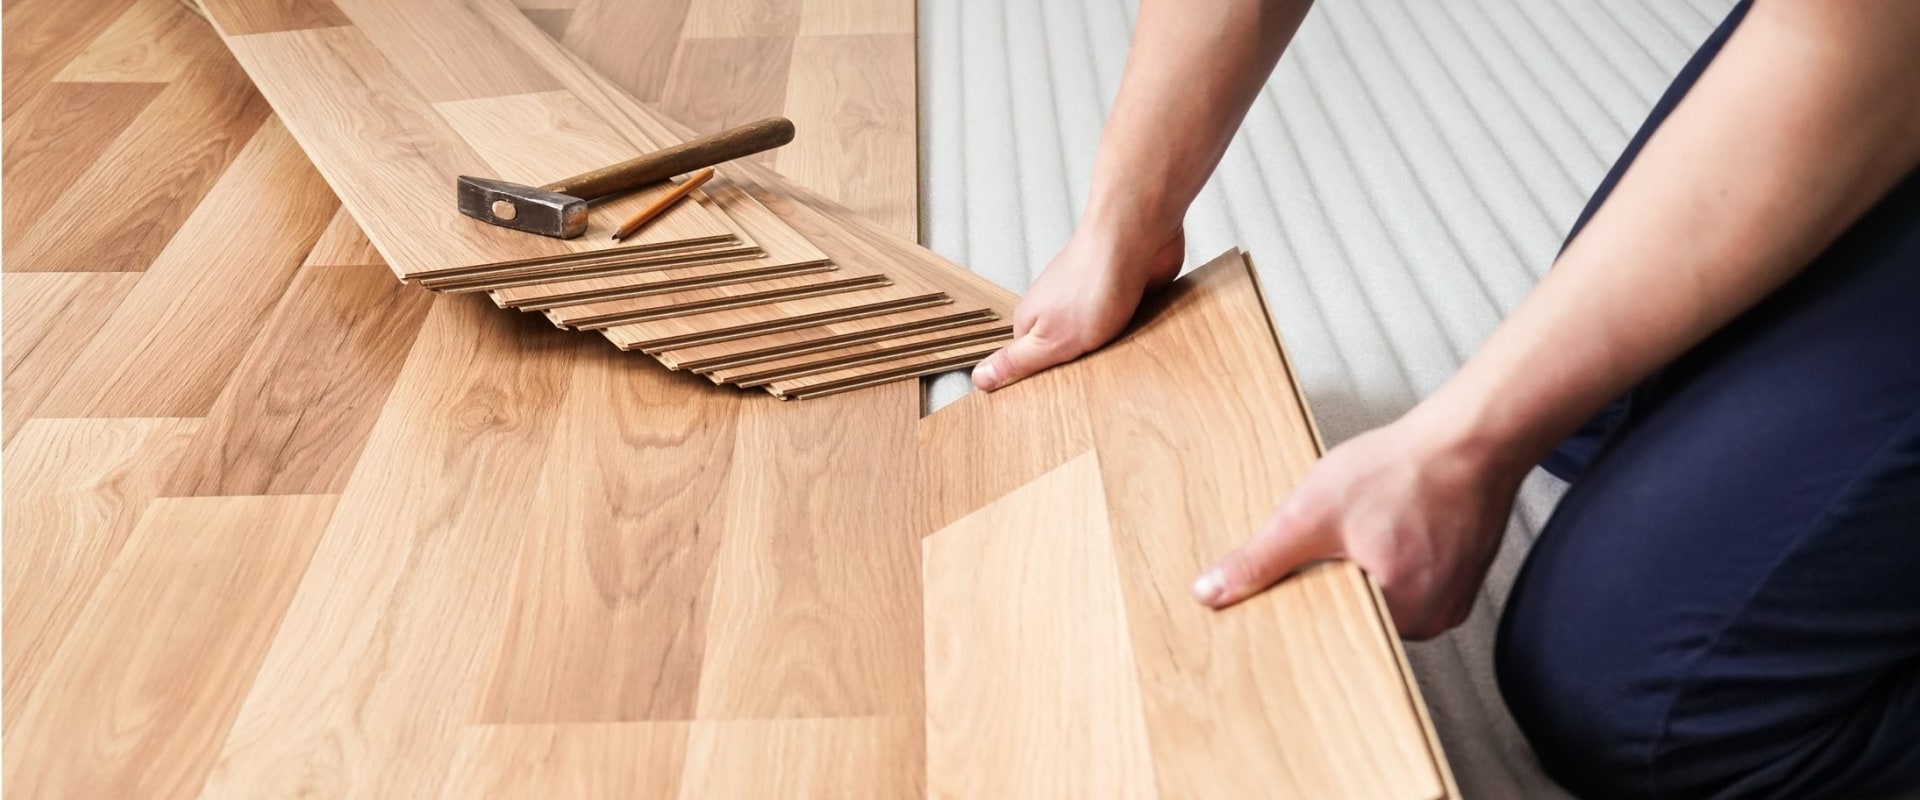 Laminate vs Vinyl Flooring: Which is the Better Choice?